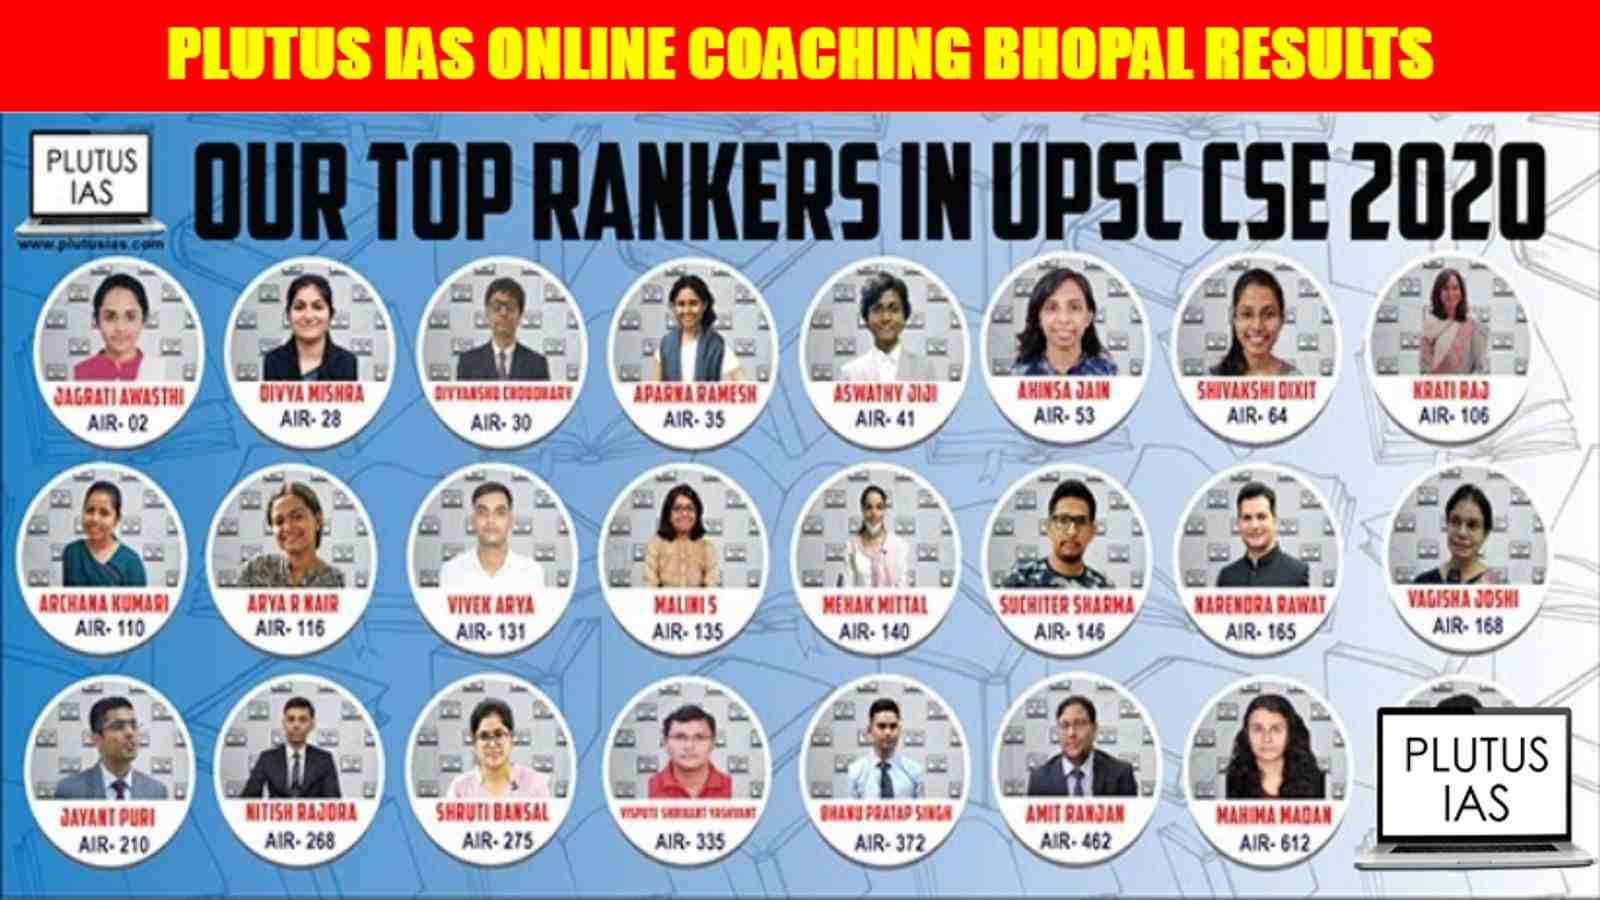 Plutus IAS Online Coaching Bhopal Results